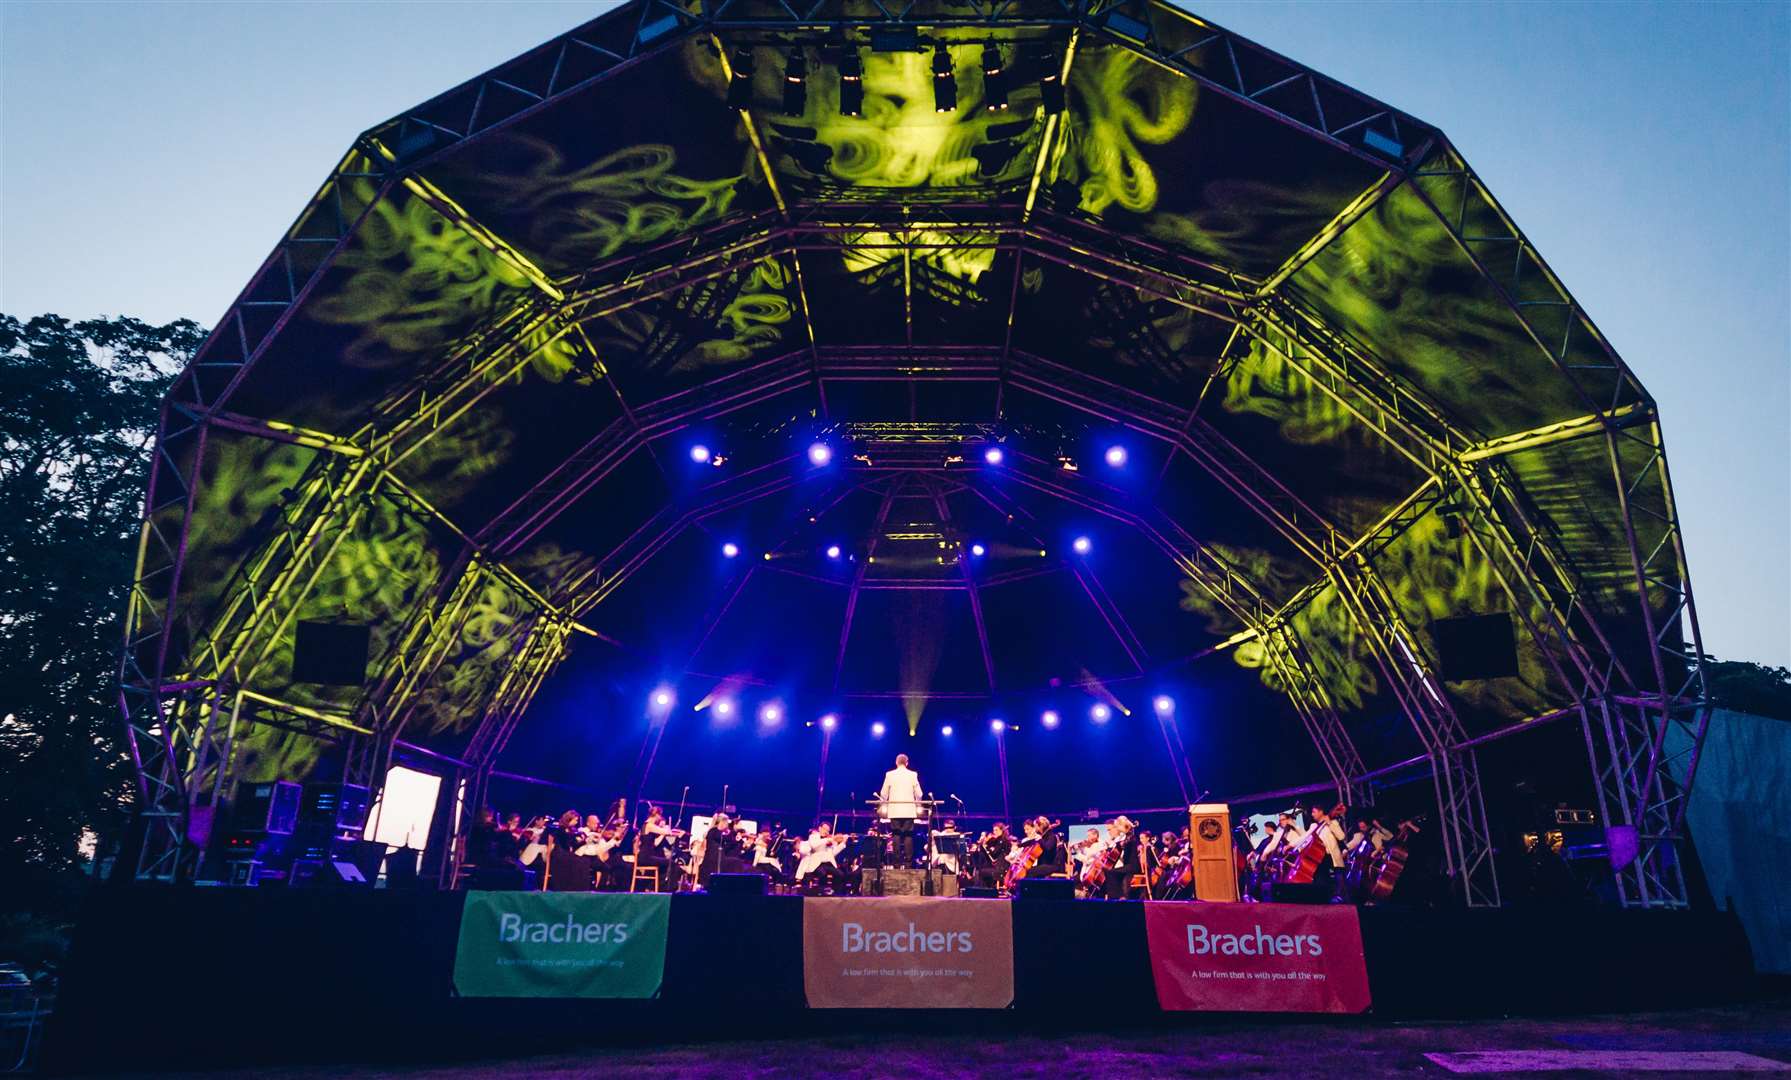 The stage at Leeds castle Classical Concert